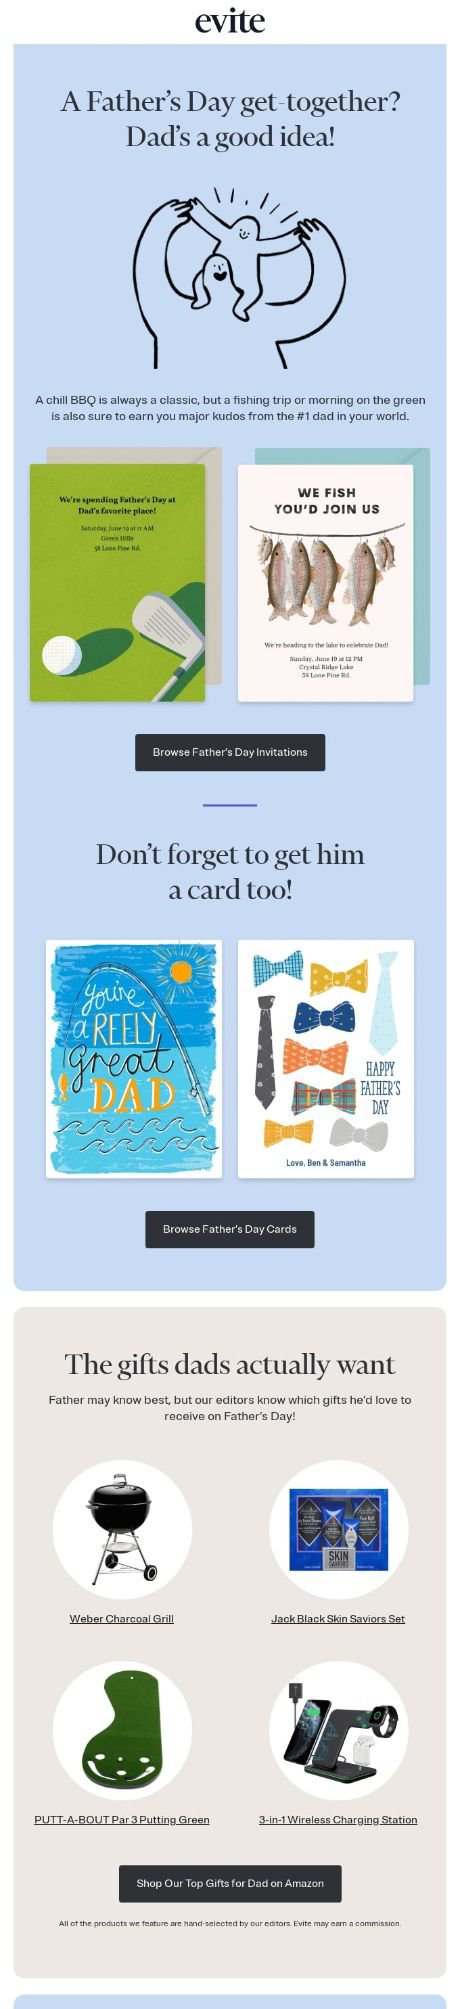 evite-fathers-day-email